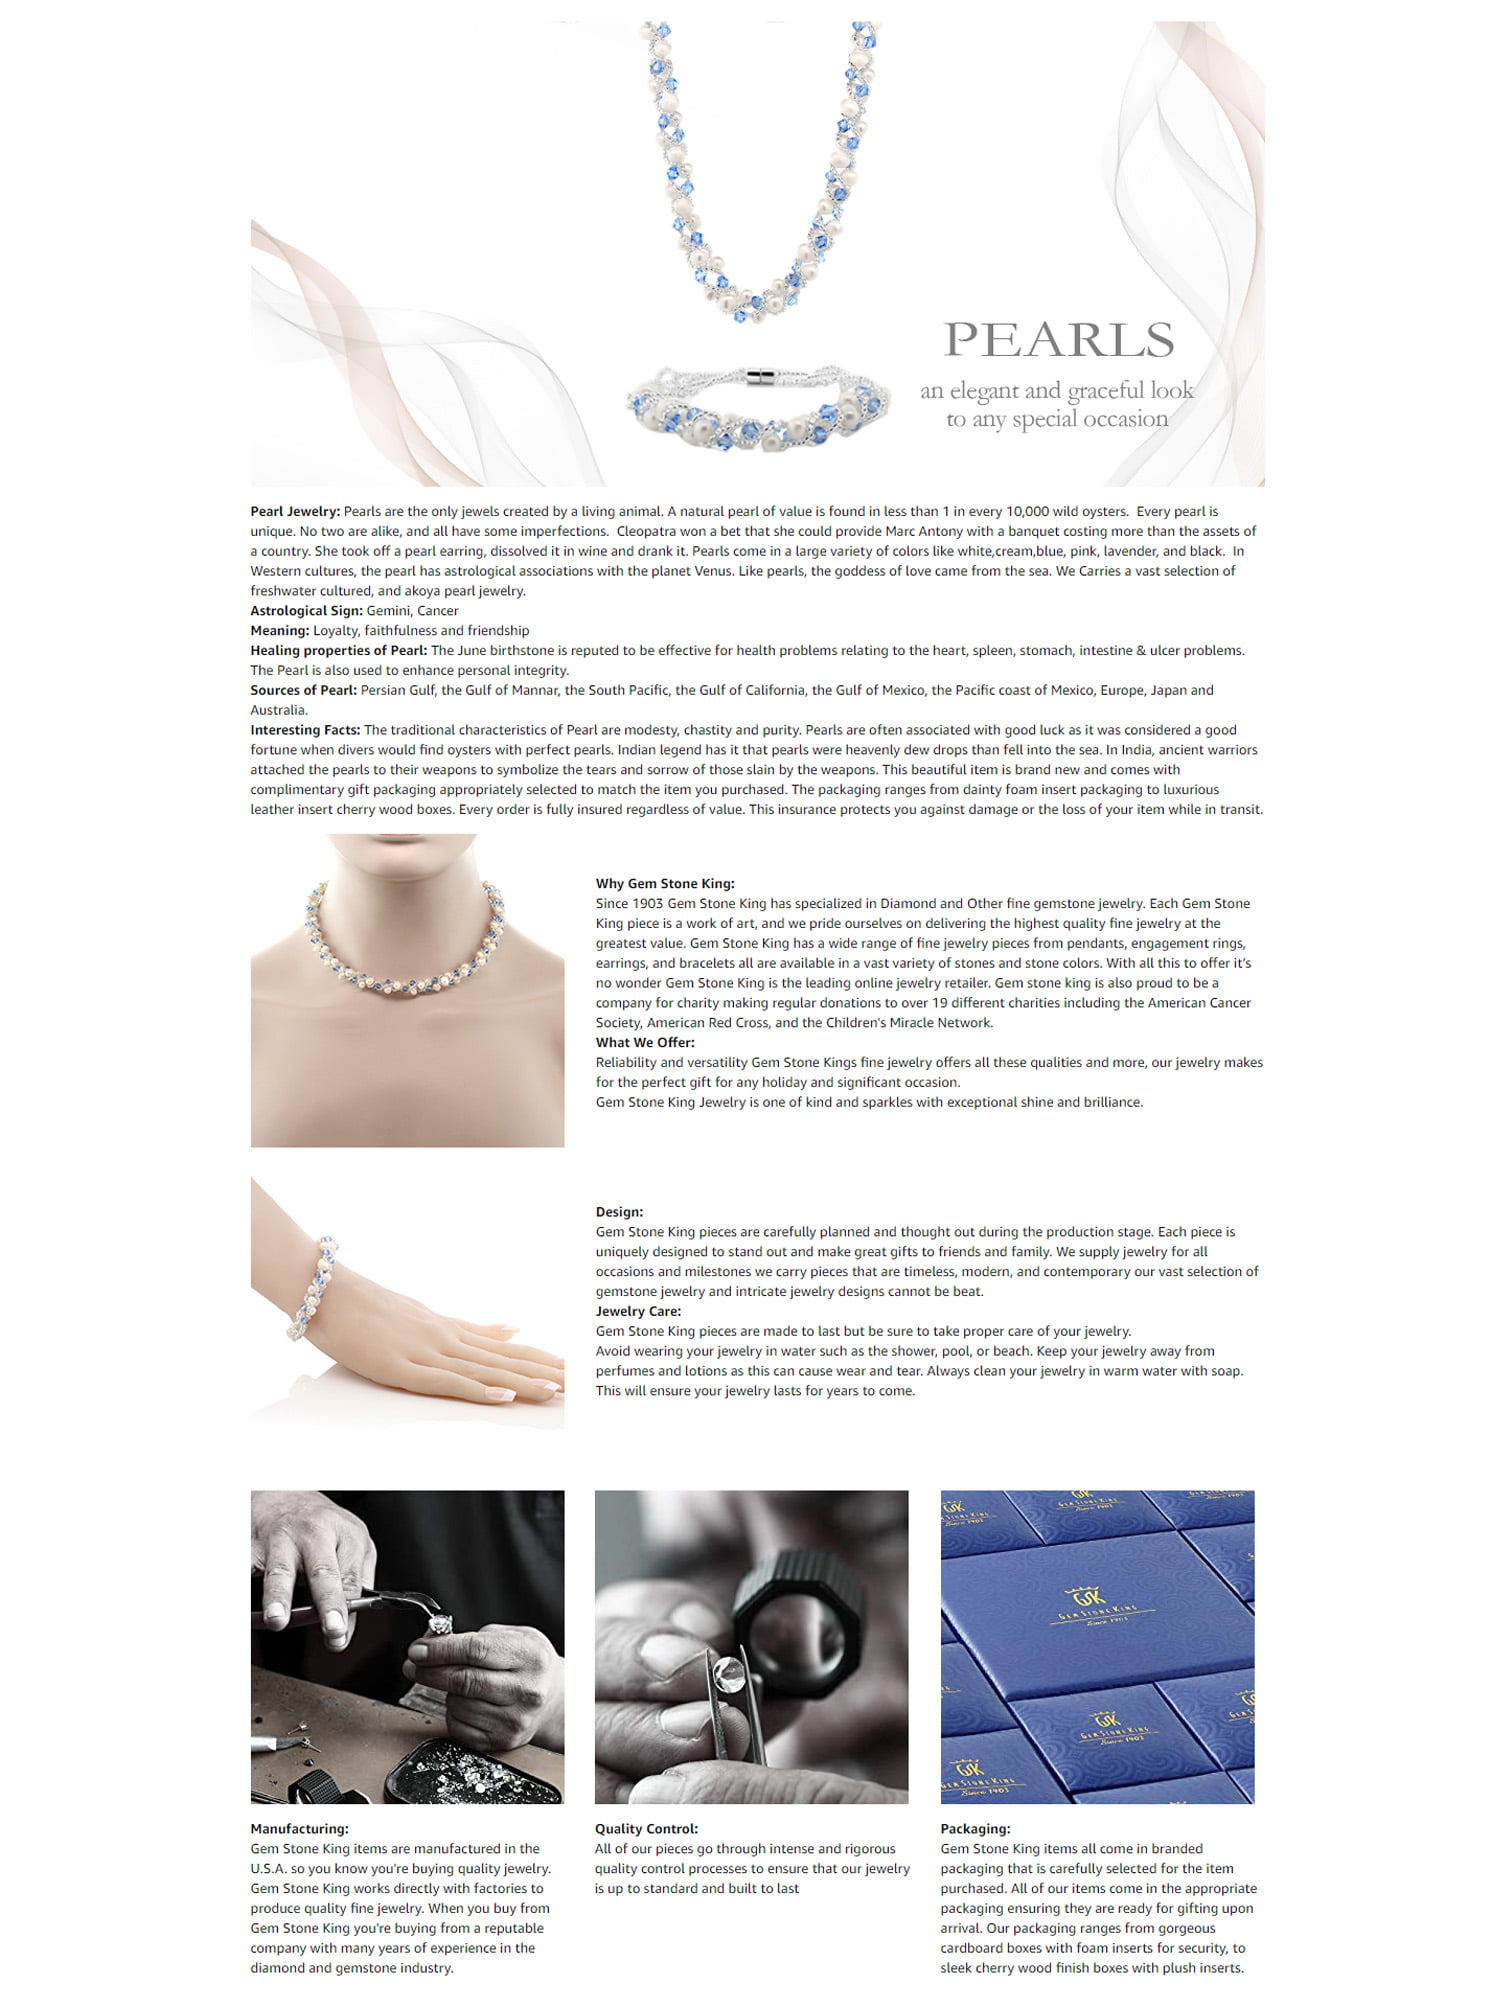 Fine jewelry - pieces made to last